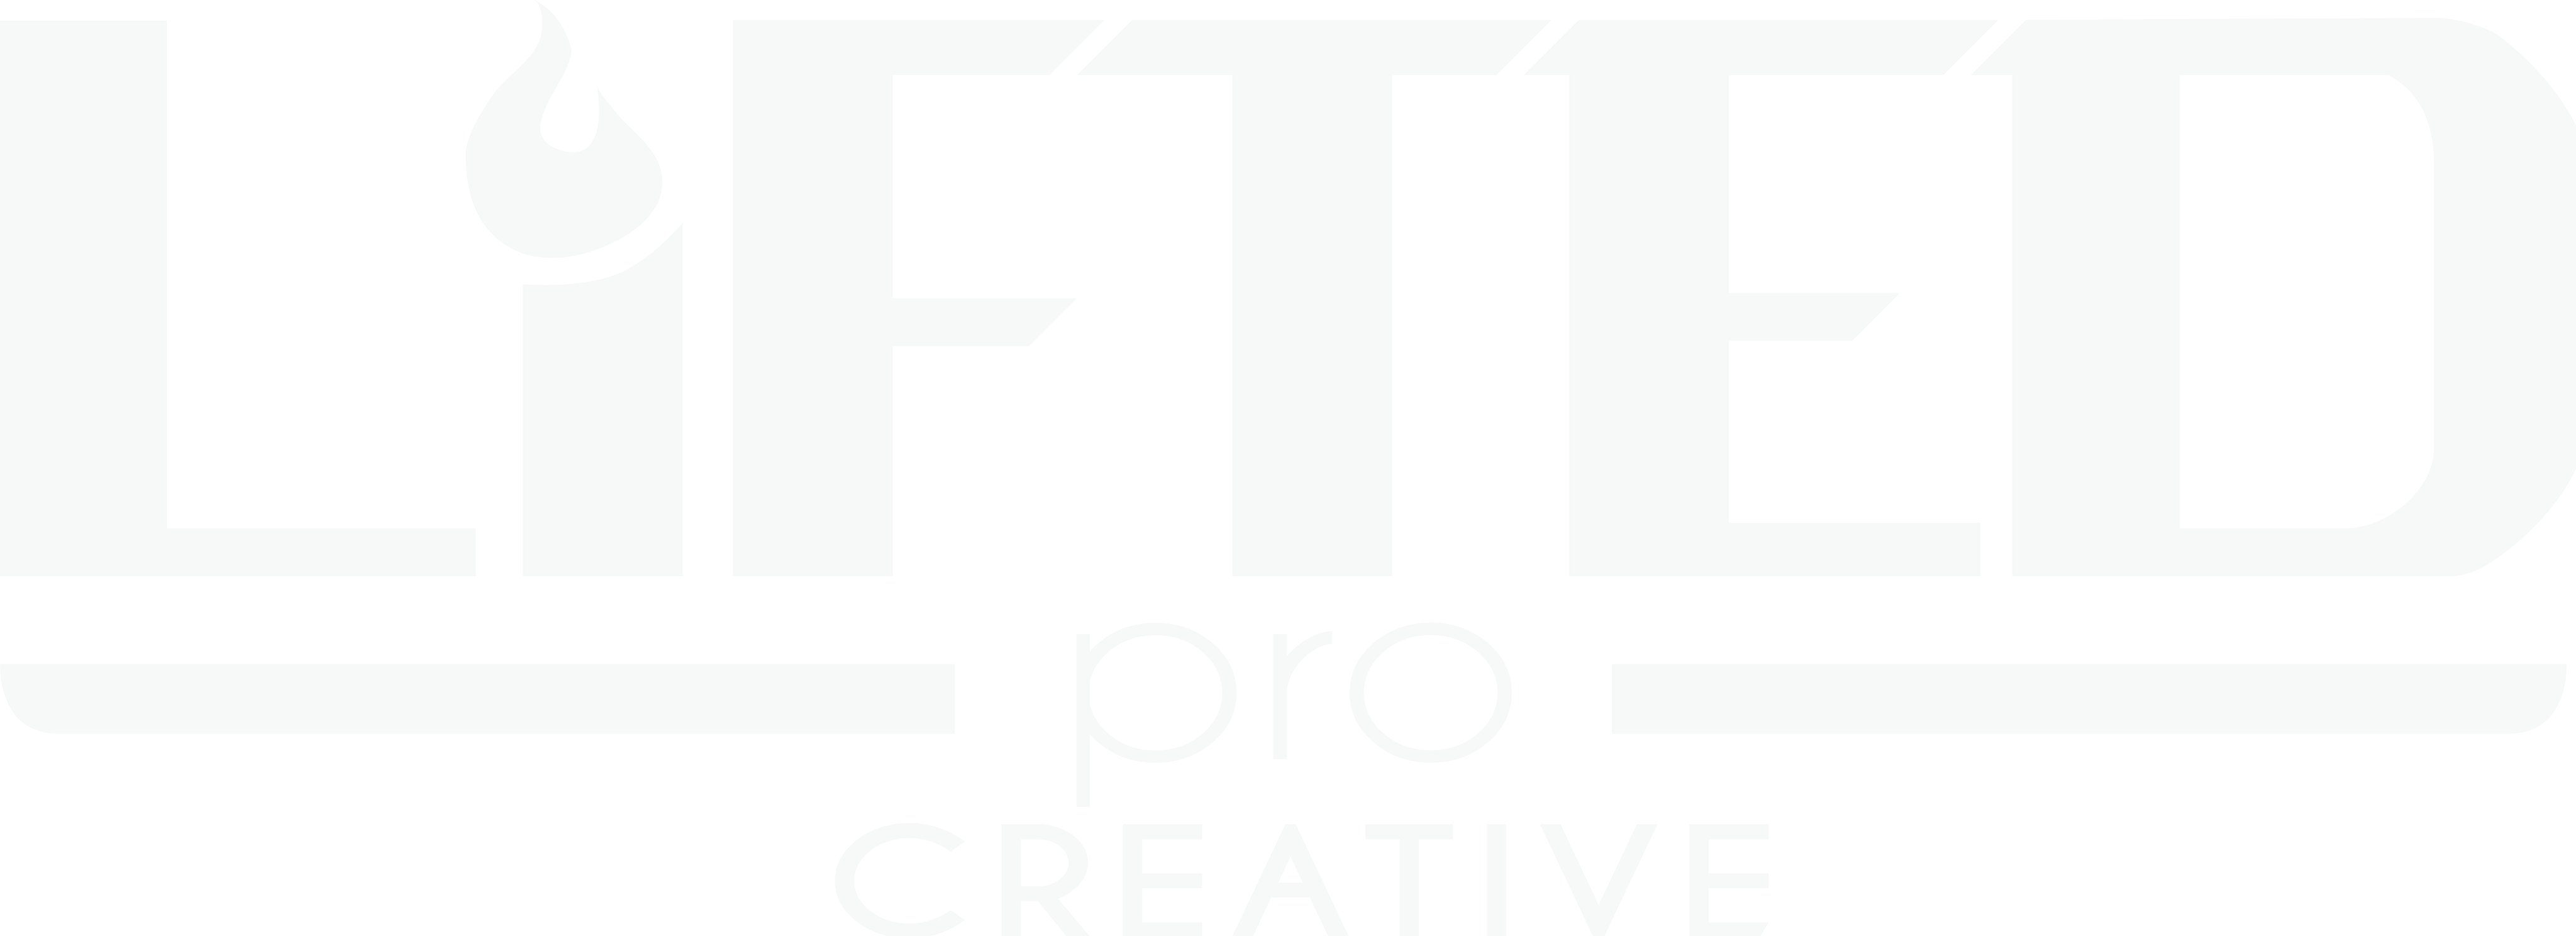 Lifted Pro Creative